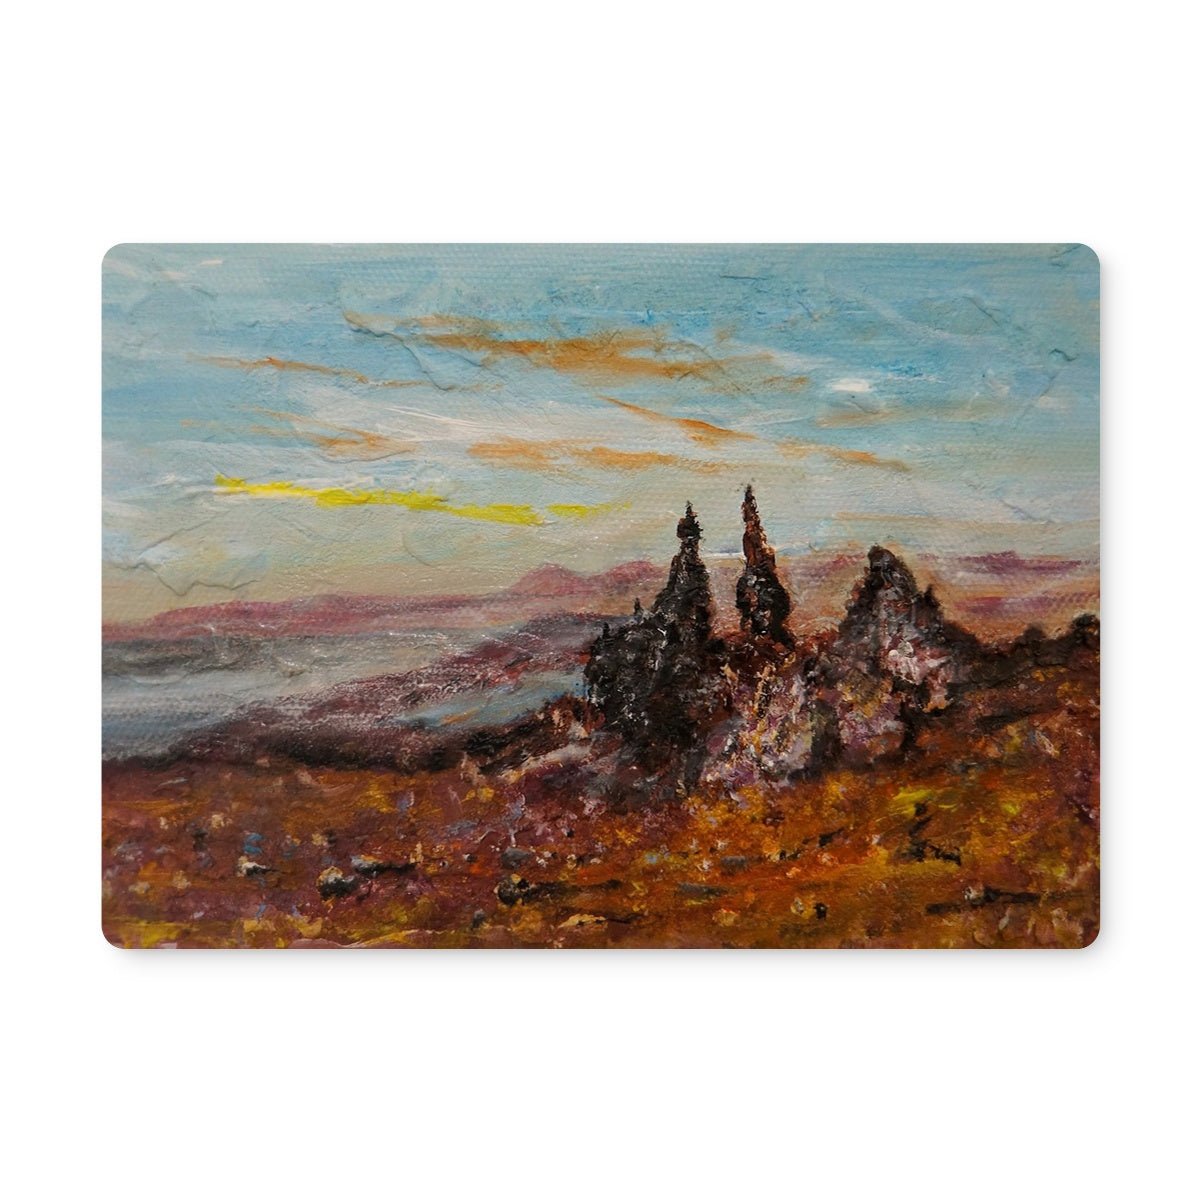 The Old Man Of Storr Skye Art Gifts Placemat-Placemats-Skye Art Gallery-4 Placemats-Paintings, Prints, Homeware, Art Gifts From Scotland By Scottish Artist Kevin Hunter